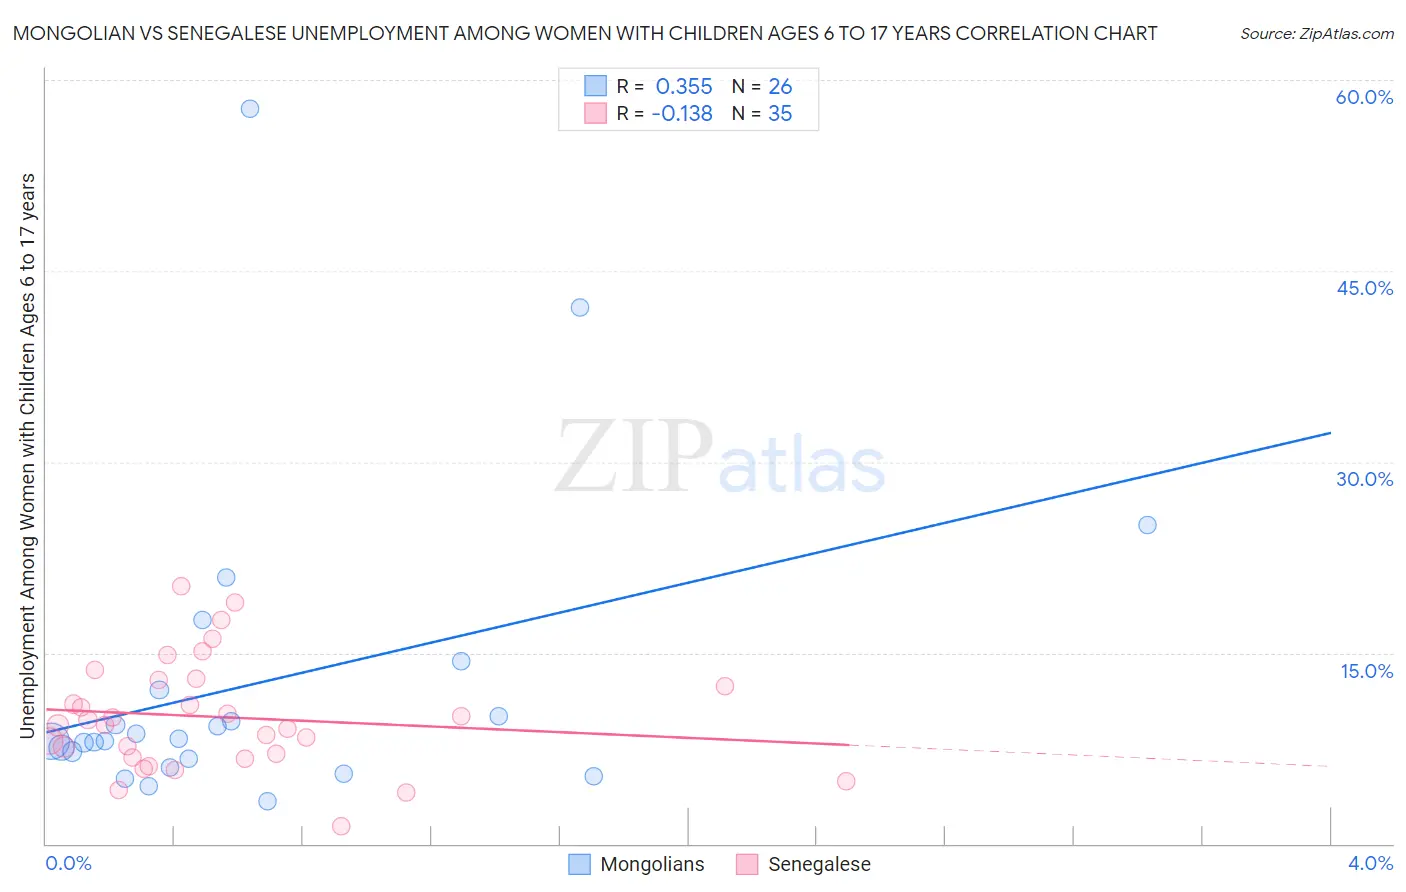 Mongolian vs Senegalese Unemployment Among Women with Children Ages 6 to 17 years